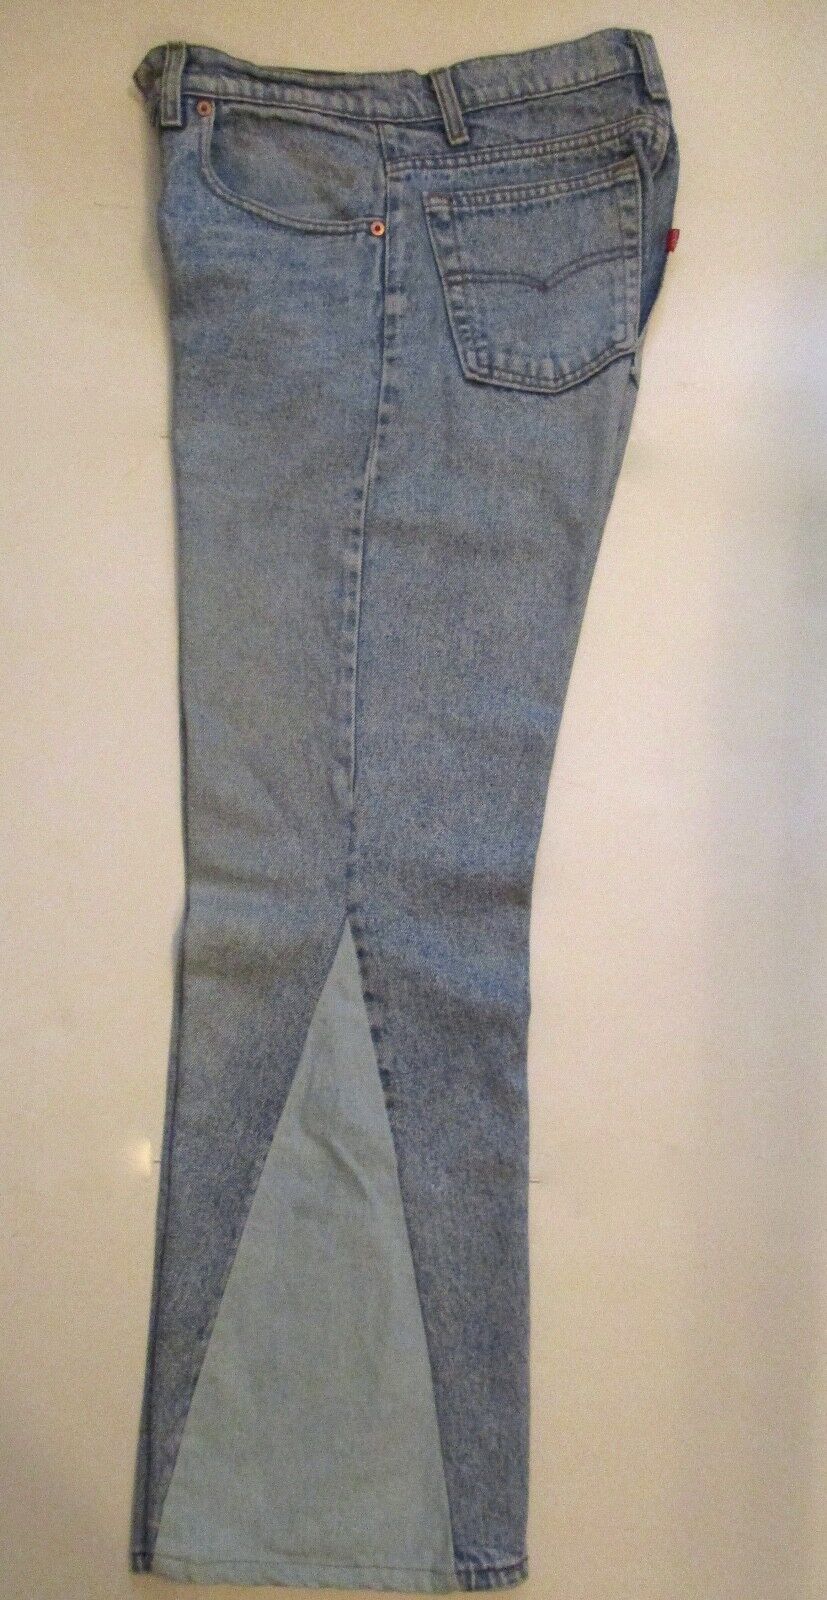 VINTAGE 1970s~BELL BOTTOMS~LEVI'S~DENIM JEANS~WITH PANEL INSERT 